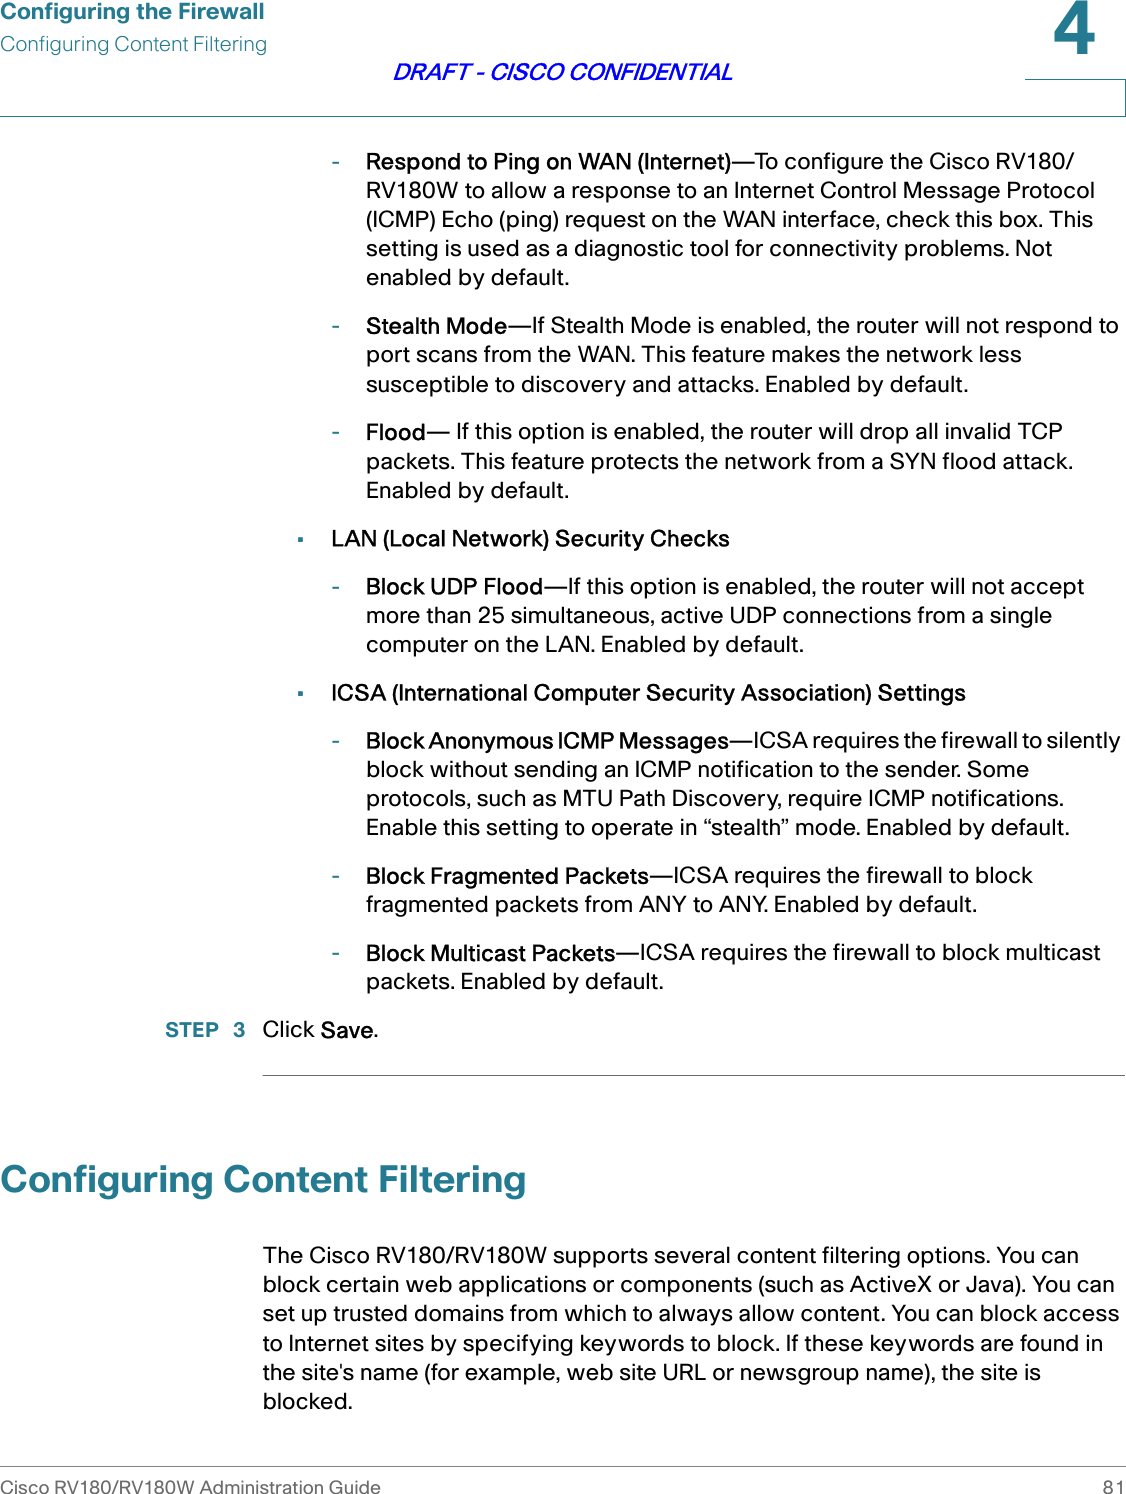 Configuring the FirewallConfiguring Content FilteringCisco RV180/RV180W Administration Guide 814DRAFT - CISCO CONFIDENTIAL-Respond to Ping on WAN (Internet)—To configure the Cisco RV180/RV180W to allow a response to an Internet Control Message Protocol (ICMP) Echo (ping) request on the WAN interface, check this box. This setting is used as a diagnostic tool for connectivity problems. Not enabled by default.-Stealth Mode—If Stealth Mode is enabled, the router will not respond to port scans from the WAN. This feature makes the network less susceptible to discovery and attacks. Enabled by default.-Flood— If this option is enabled, the router will drop all invalid TCP packets. This feature protects the network from a SYN flood attack. Enabled by default.•LAN (Local Network) Security Checks-Block UDP Flood—If this option is enabled, the router will not accept more than 25 simultaneous, active UDP connections from a single computer on the LAN. Enabled by default.•ICSA (International Computer Security Association) Settings-Block Anonymous ICMP Messages—ICSA requires the firewall to silently block without sending an ICMP notification to the sender. Some protocols, such as MTU Path Discovery, require ICMP notifications. Enable this setting to operate in “stealth” mode. Enabled by default.-Block Fragmented Packets—ICSA requires the firewall to block fragmented packets from ANY to ANY. Enabled by default.-Block Multicast Packets—ICSA requires the firewall to block multicast packets. Enabled by default.STEP  3 Click Save. Configuring Content FilteringThe Cisco RV180/RV180W supports several content filtering options. You can block certain web applications or components (such as ActiveX or Java). You can set up trusted domains from which to always allow content. You can block access to Internet sites by specifying keywords to block. If these keywords are found in the site&apos;s name (for example, web site URL or newsgroup name), the site is blocked. 